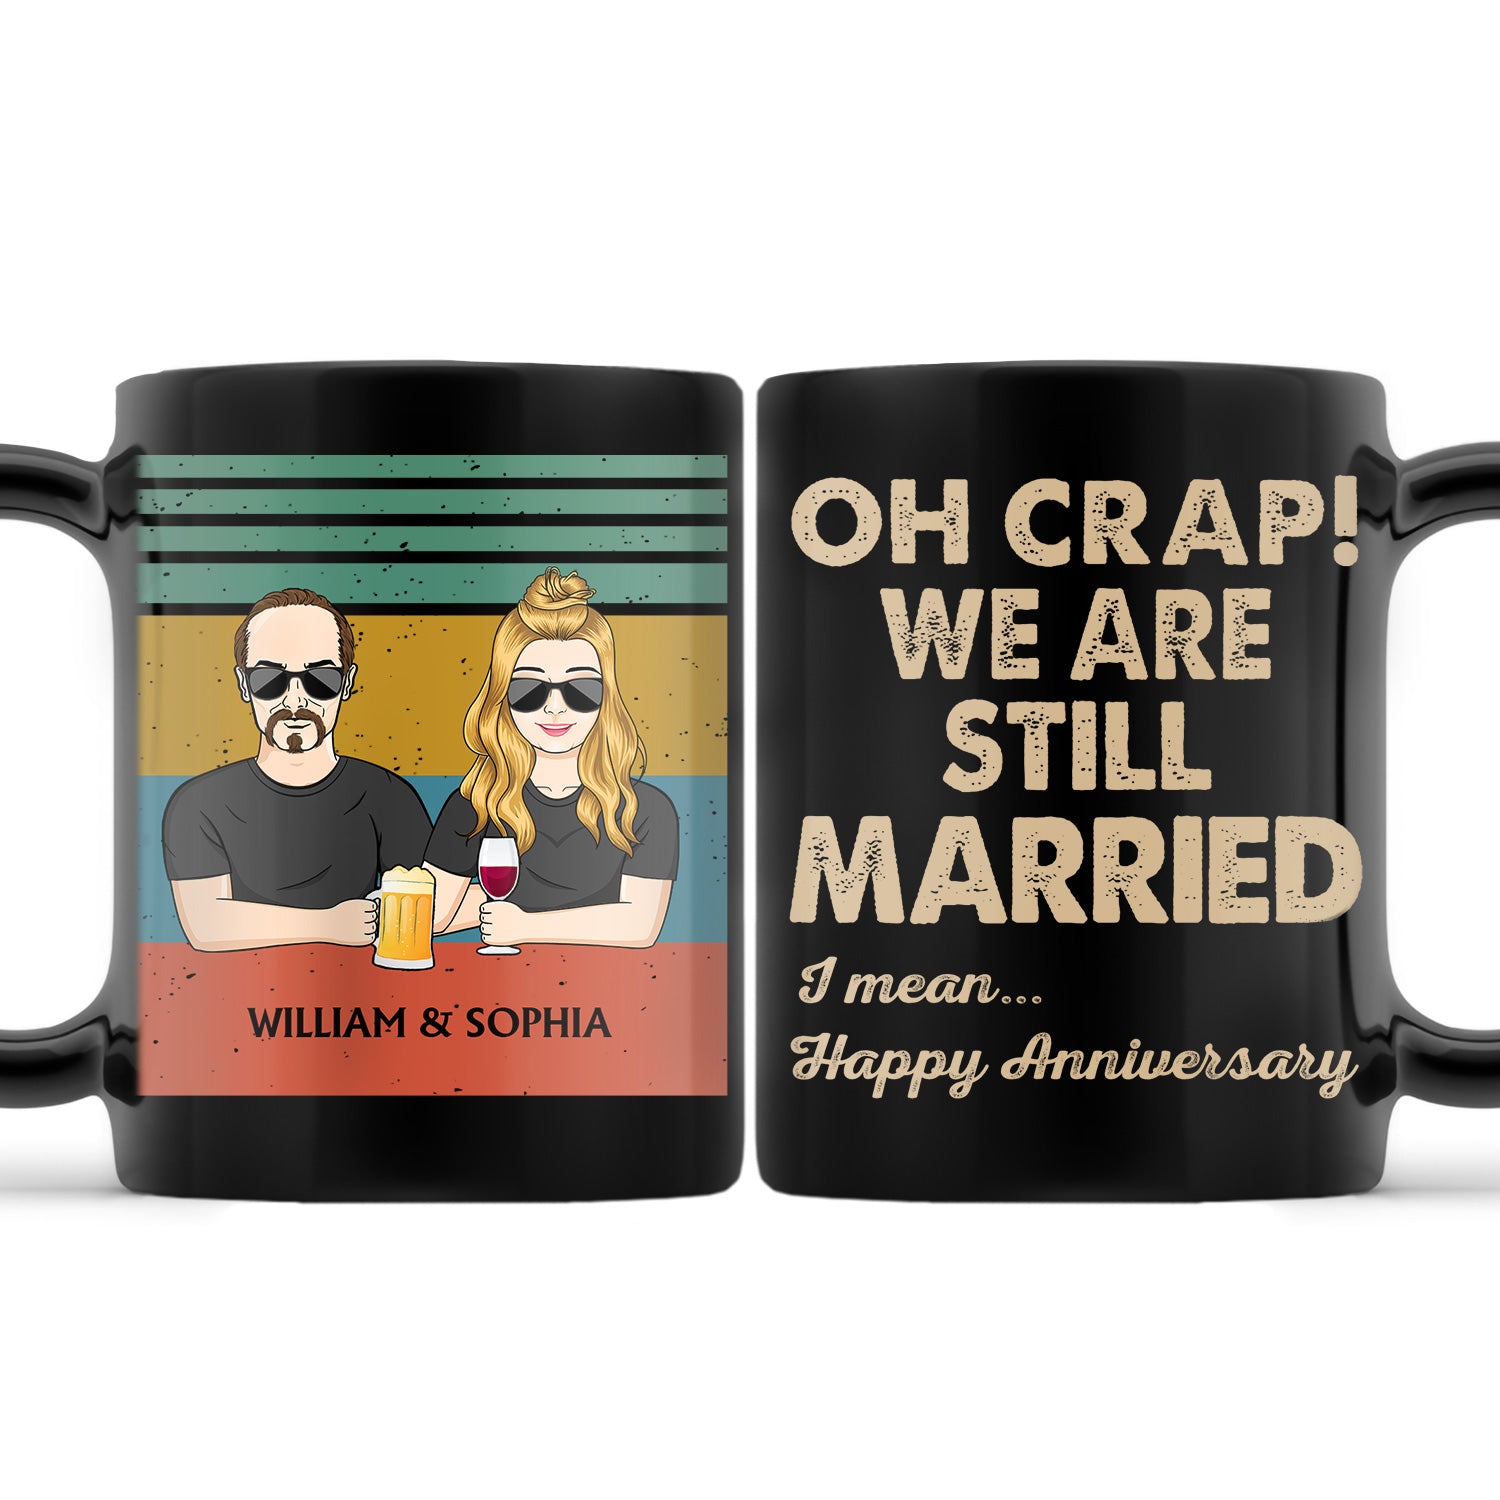 Oh Crap We're Still Married I Mean Happy Anniversary - Birthday, Loving Gift For Spouse, Couple, Husband, Wife - Personalized Black Mug